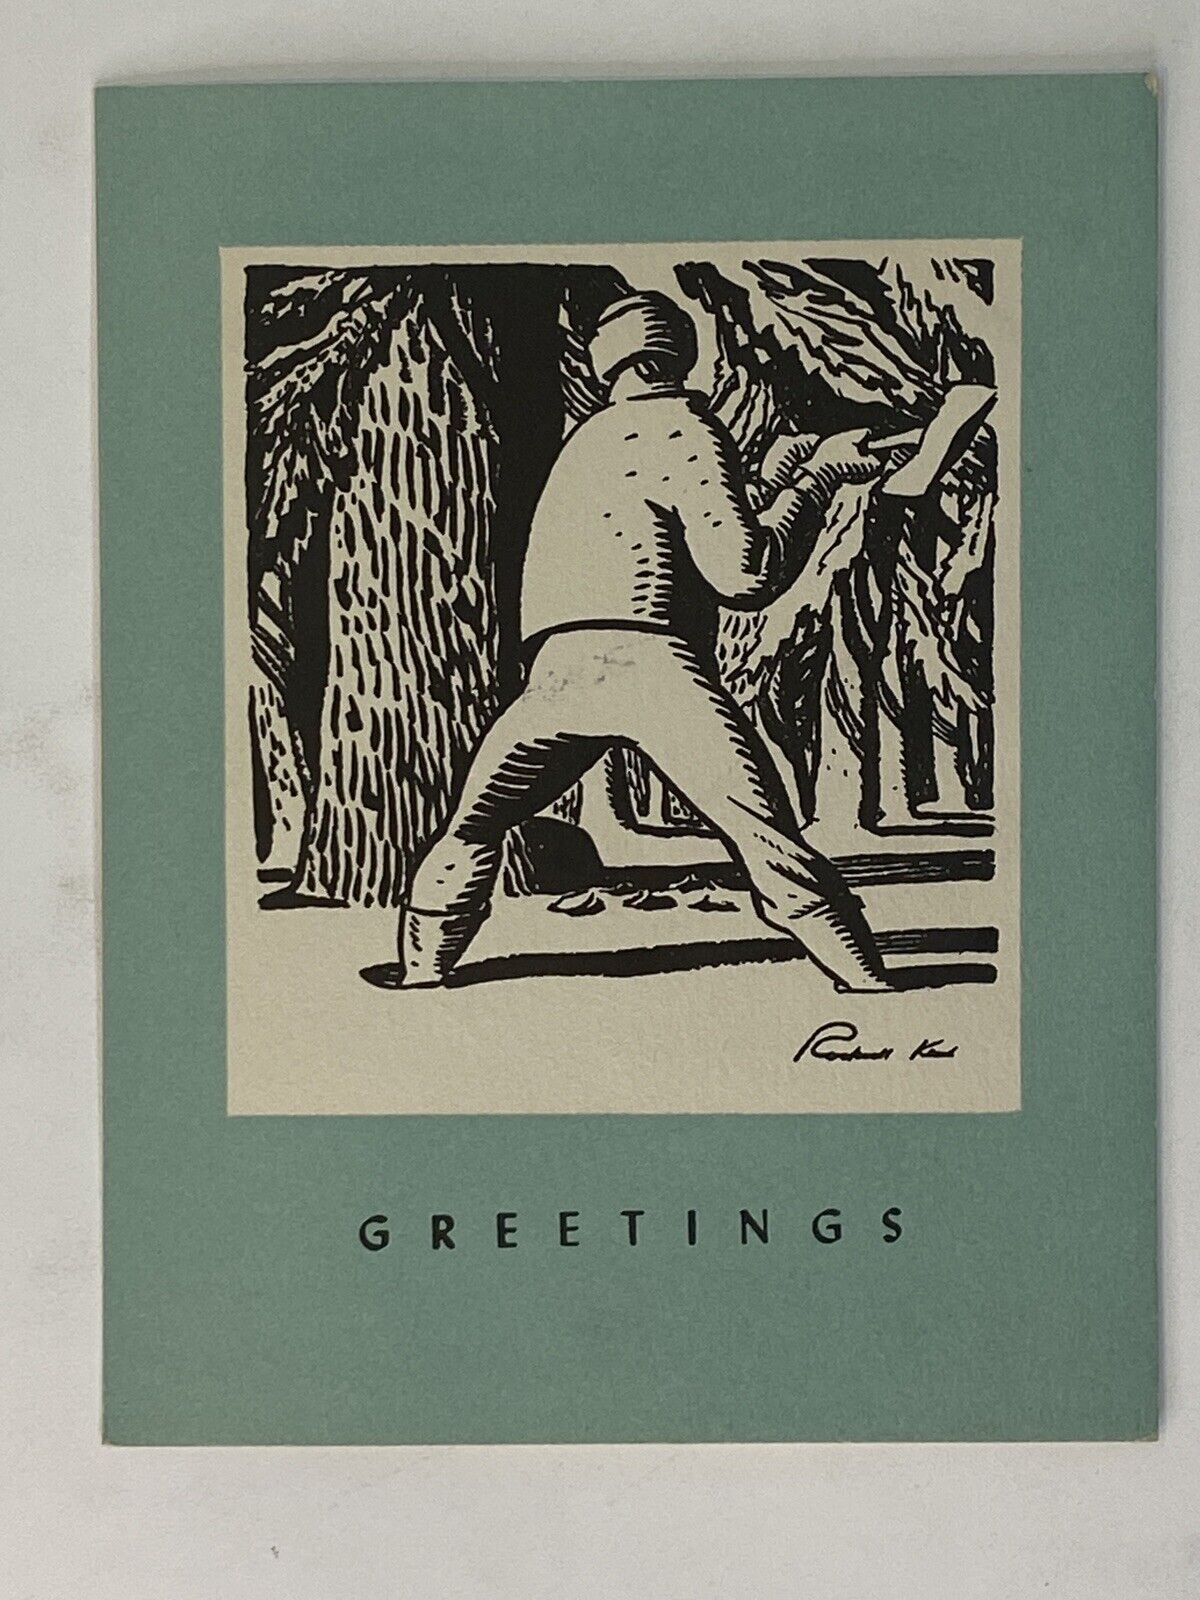 VTG Rockwell Kent Xmas Greeting Card Cutting a Tree AAG 10332 rare used